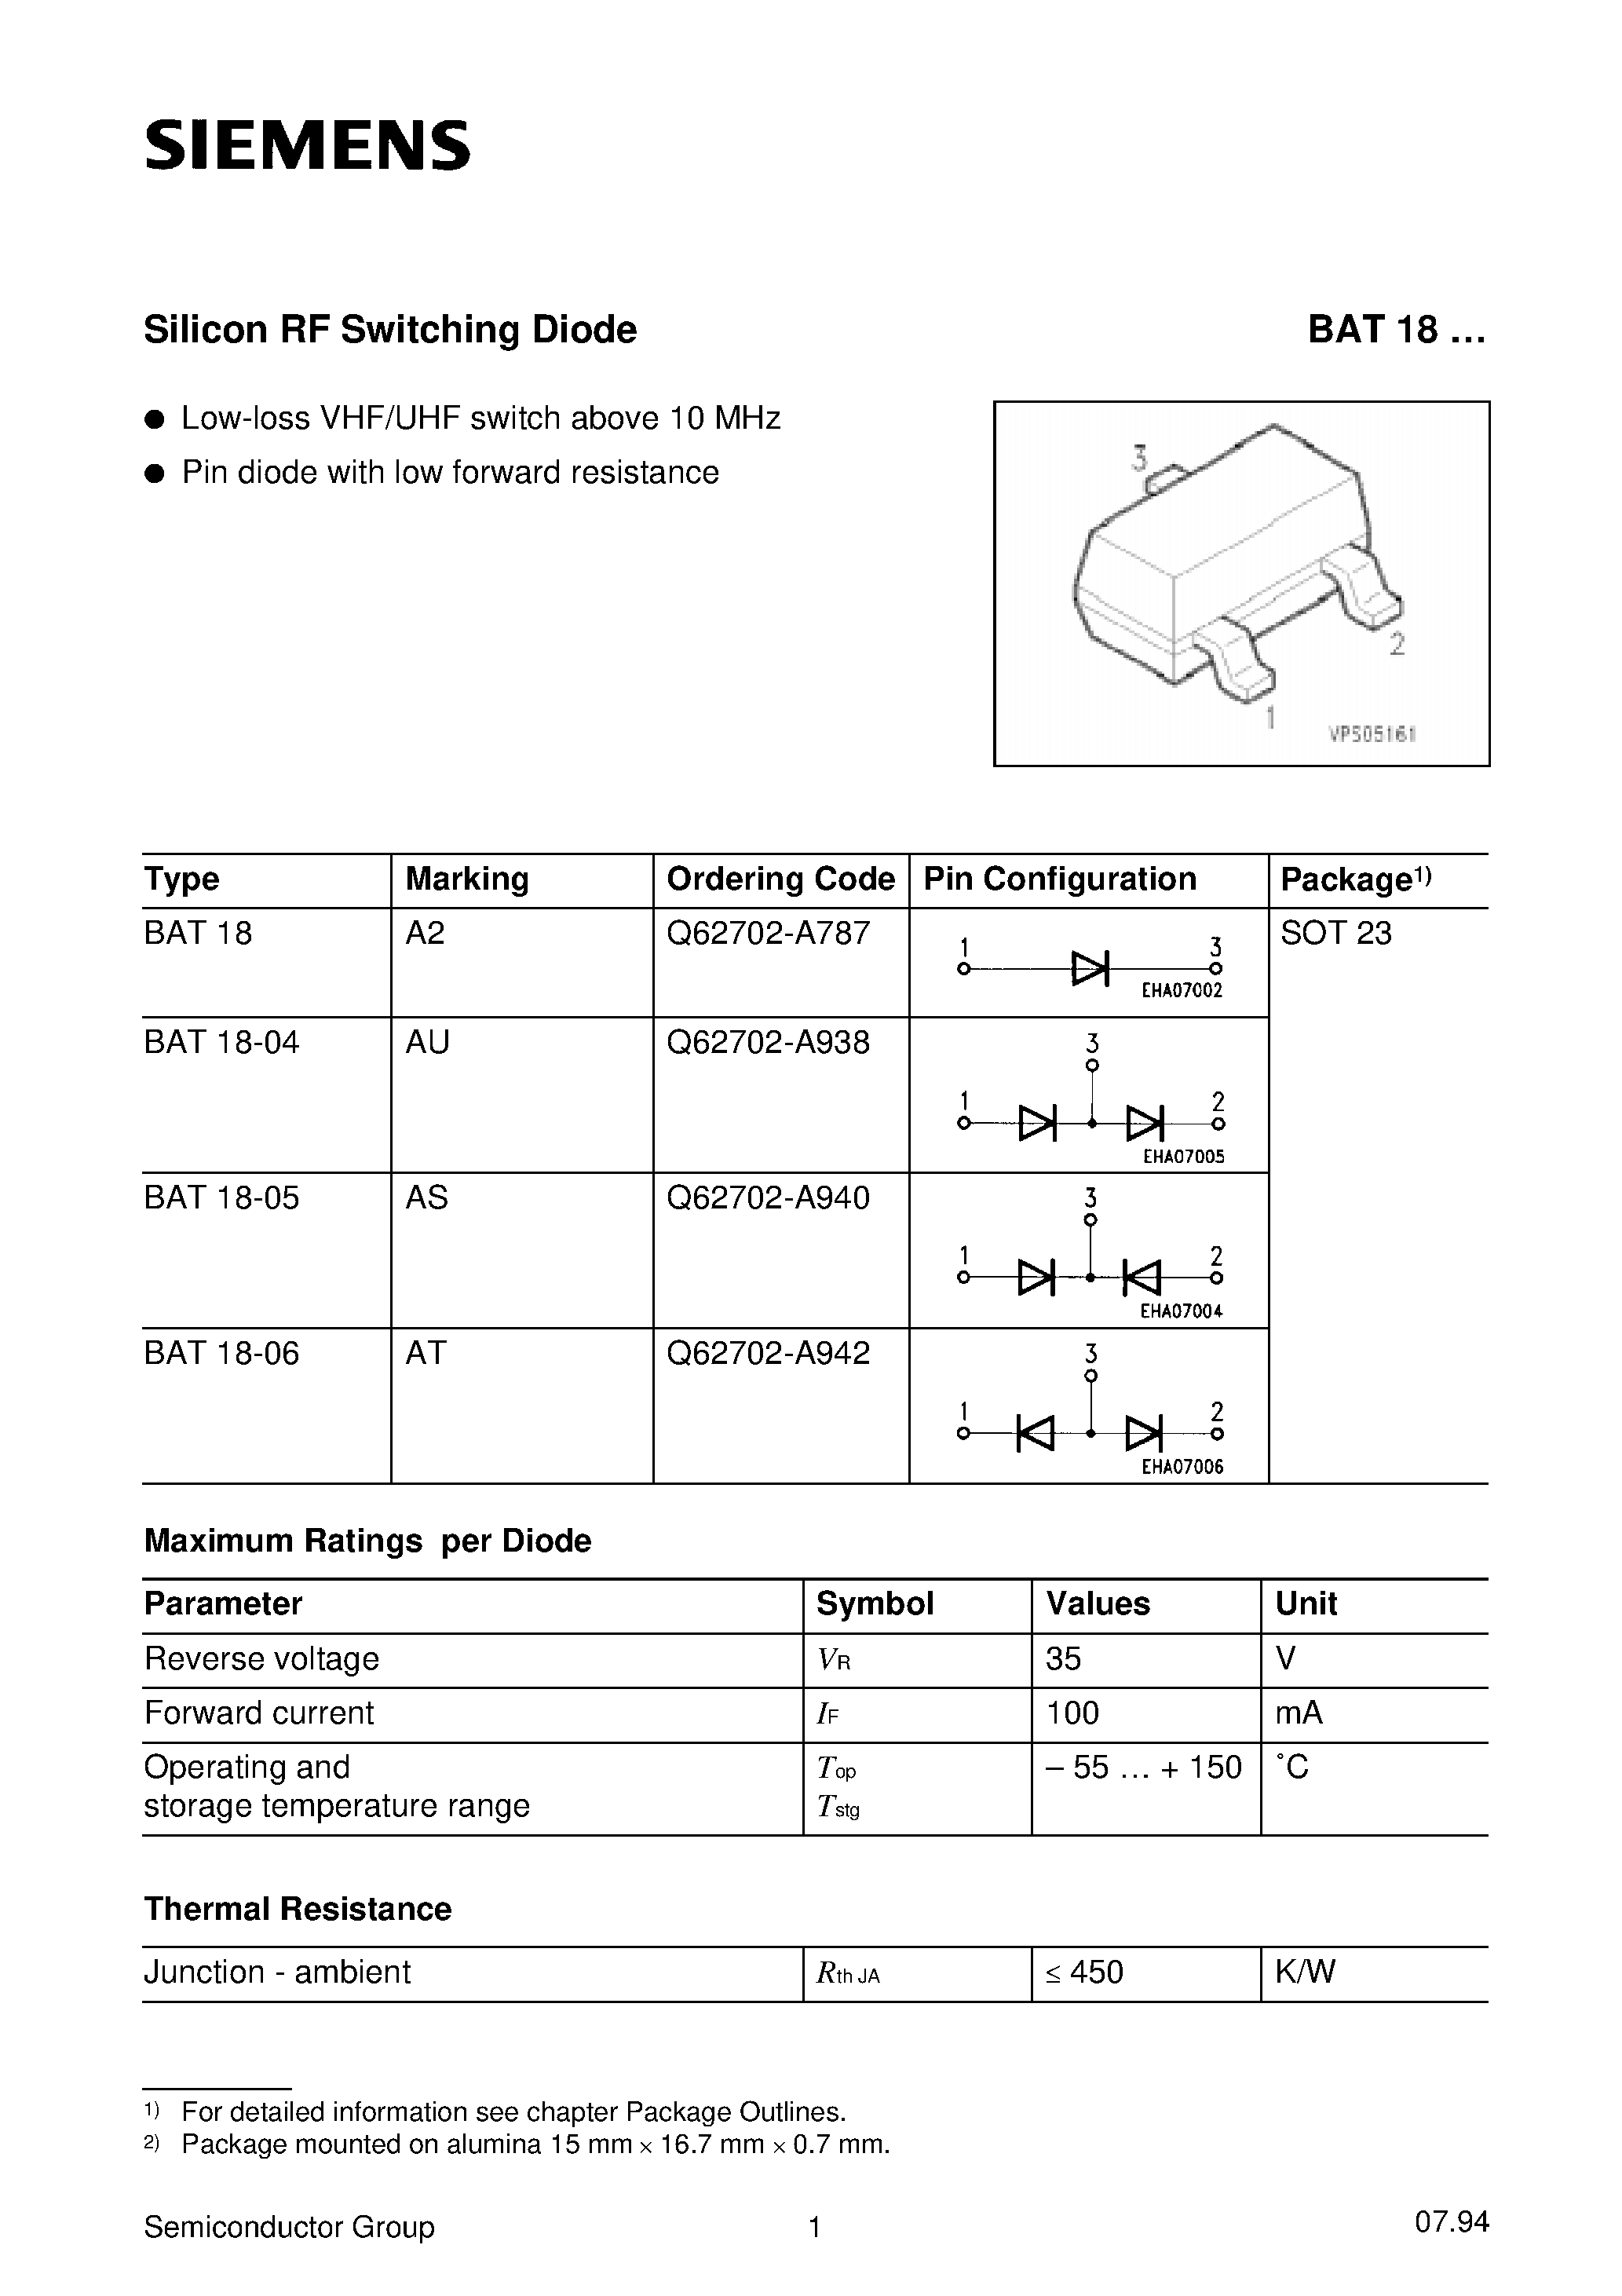 Datasheet BAT18- - Silicon RF Switching Diode (Low-loss VHF/UHF switch above 10 MHz Pin diode with low forward resistance) page 1